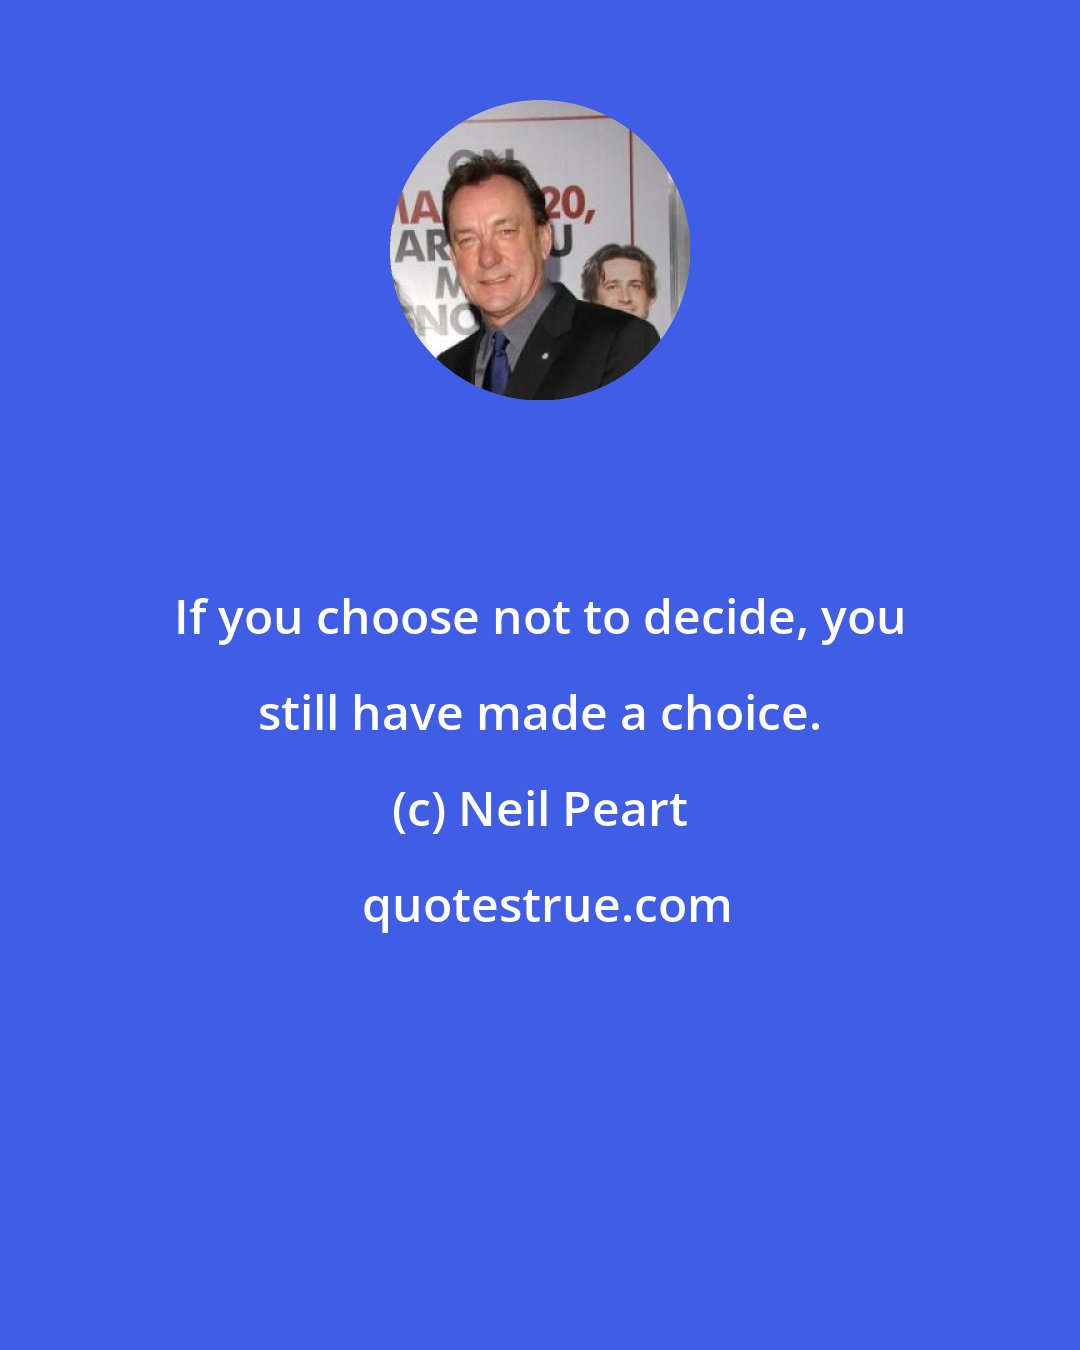 Neil Peart: If you choose not to decide, you still have made a choice.